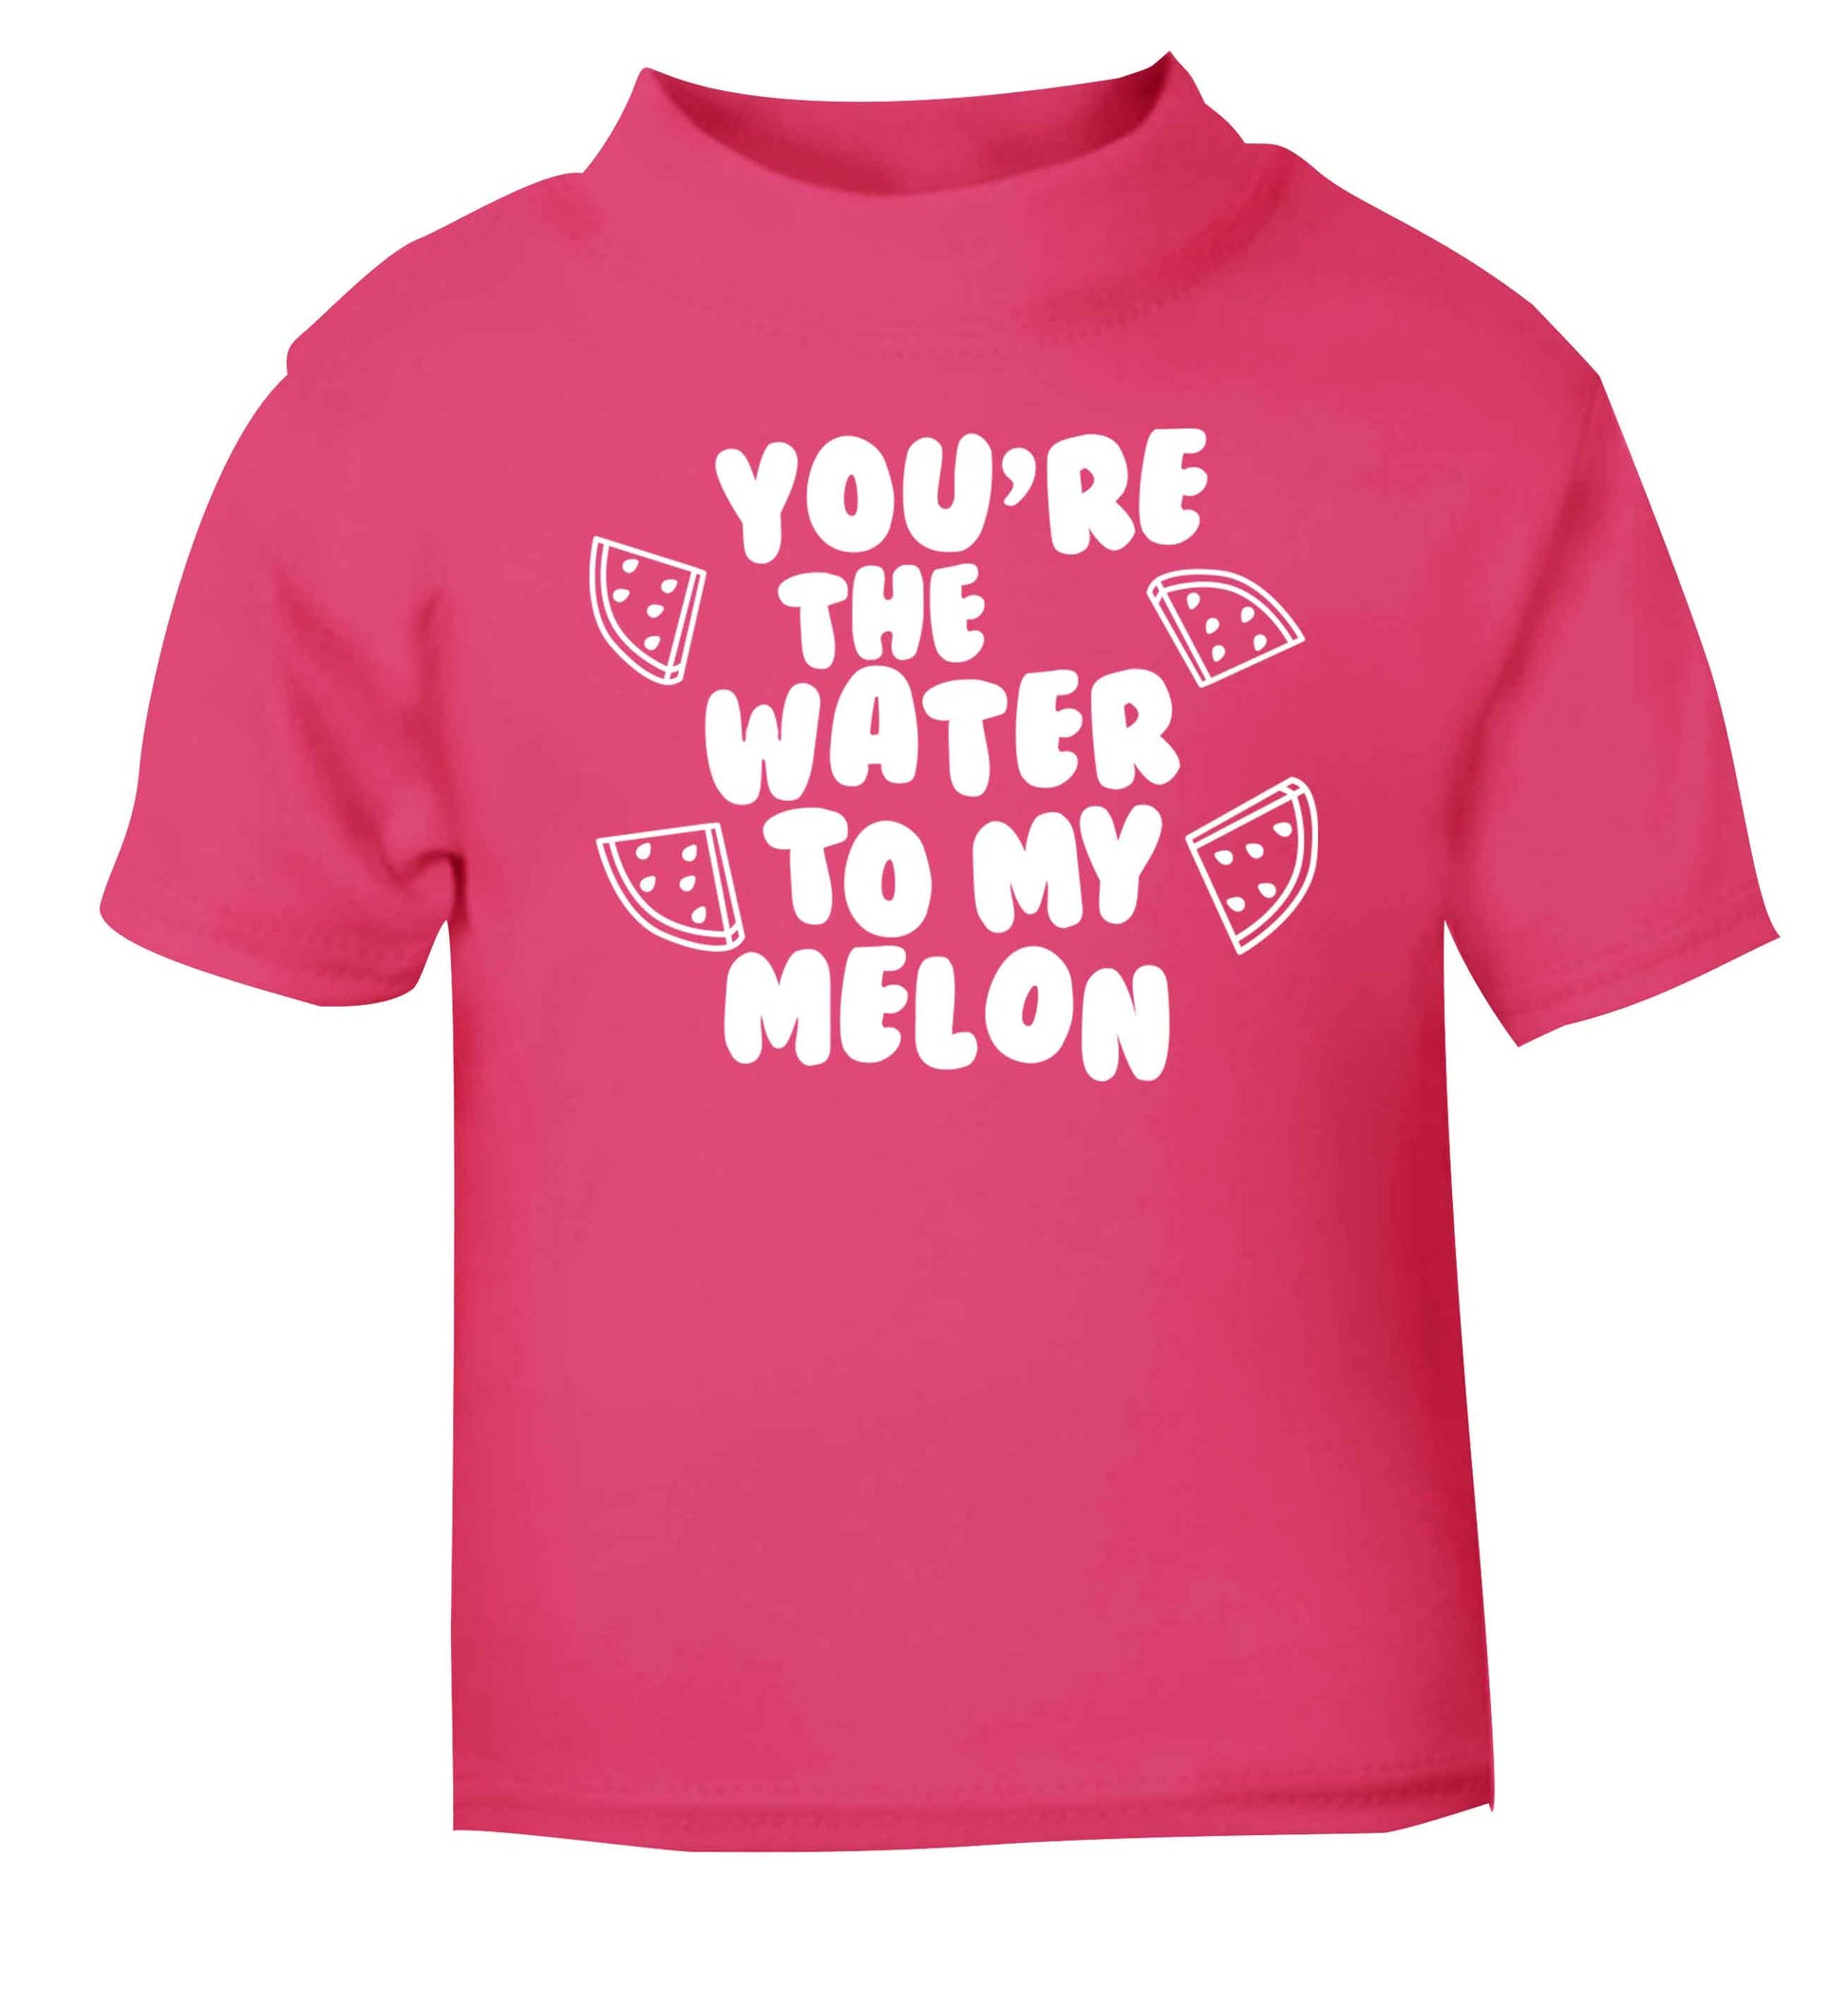 You're the water to my melon pink baby toddler Tshirt 2 Years